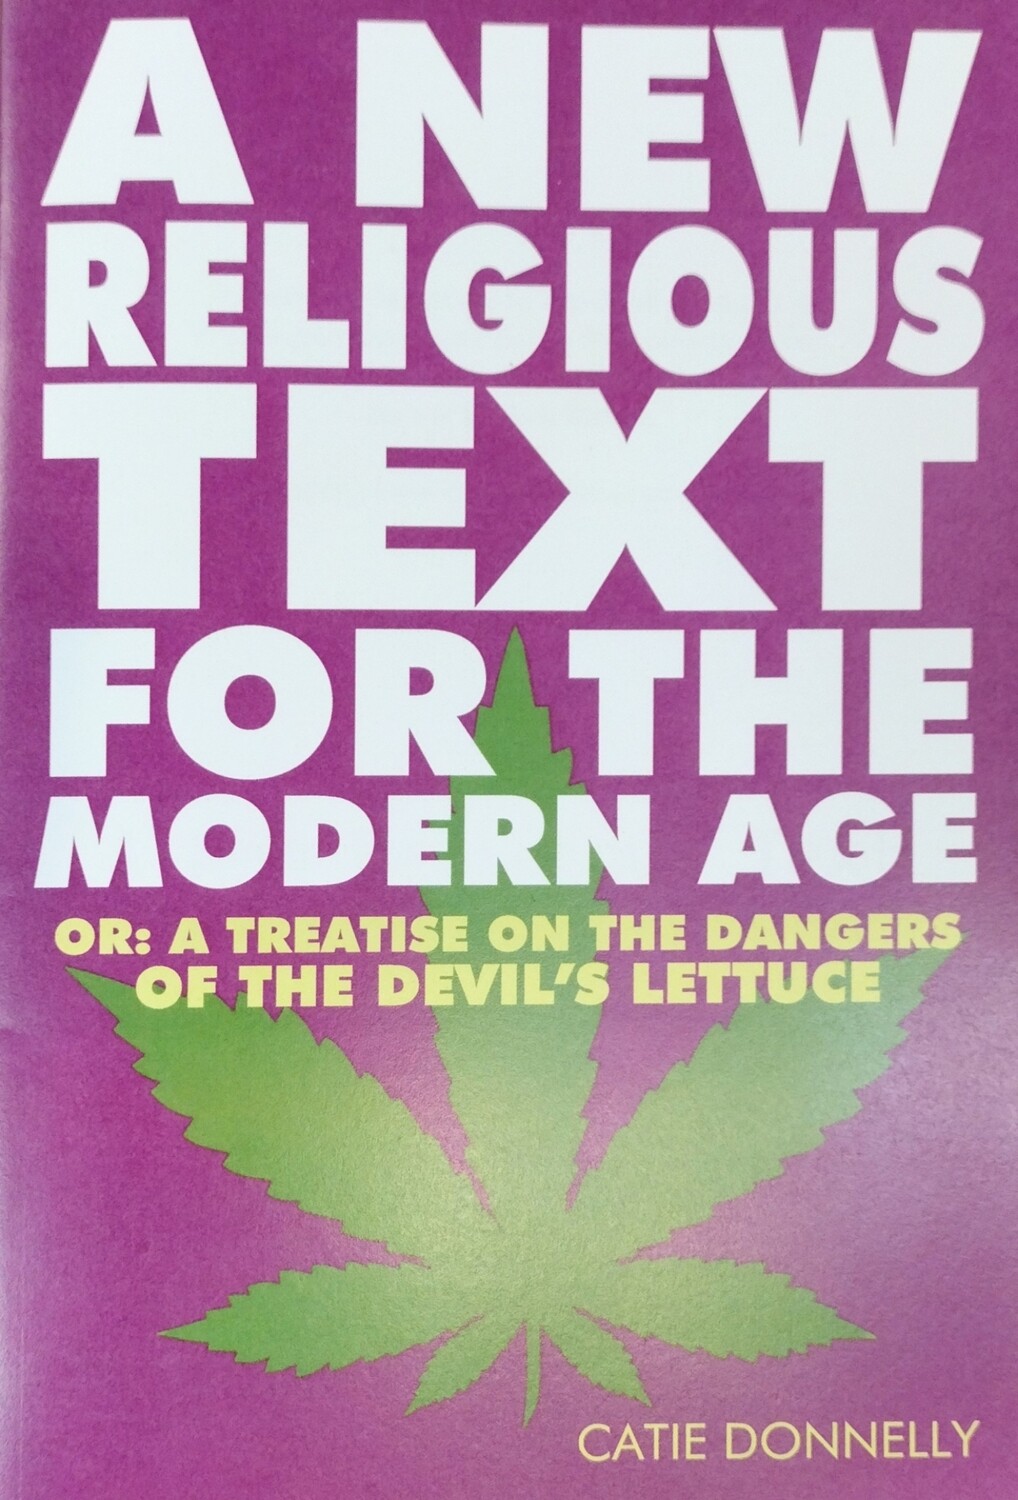 A New Religious Text For The Modern Age - Book by Catie Donnelly